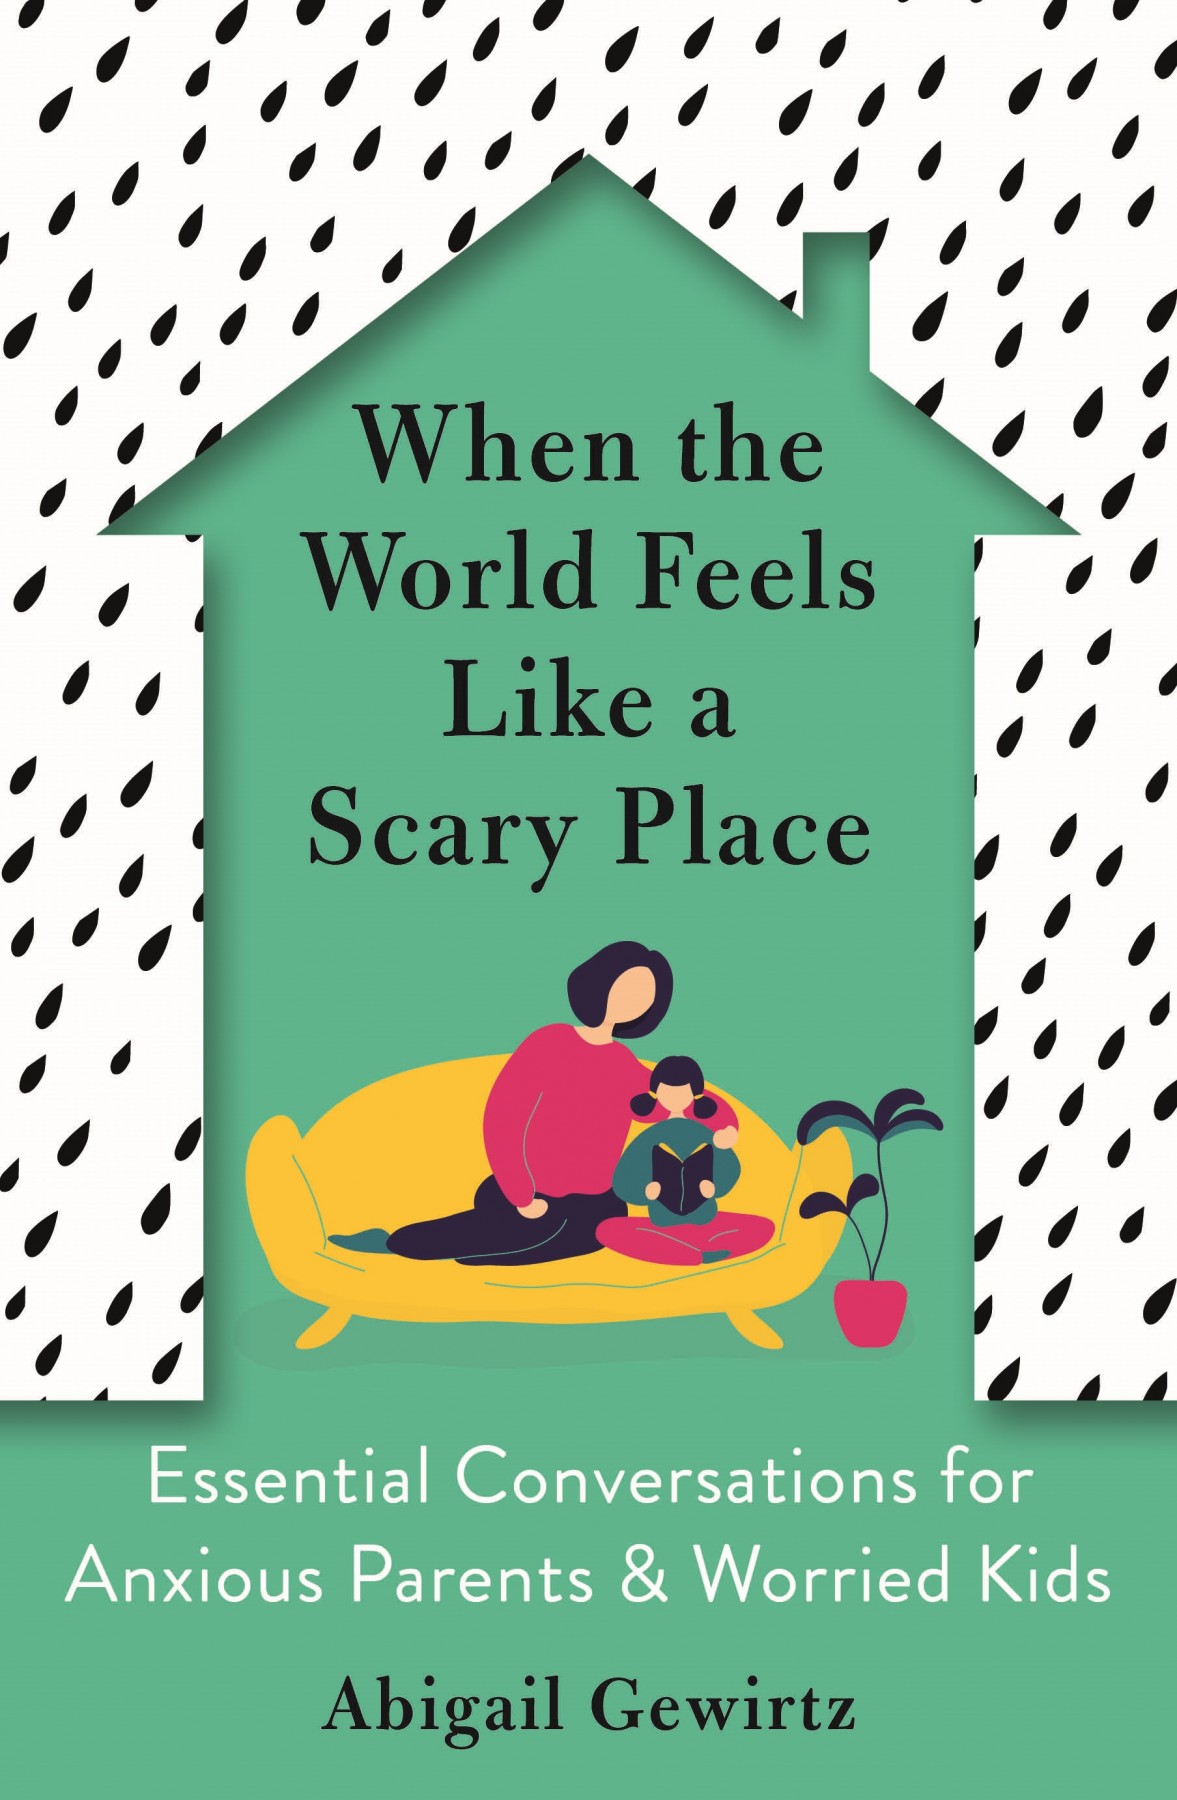 When the world feels like a scary place: Essential conversations for anxious parents & worried kids